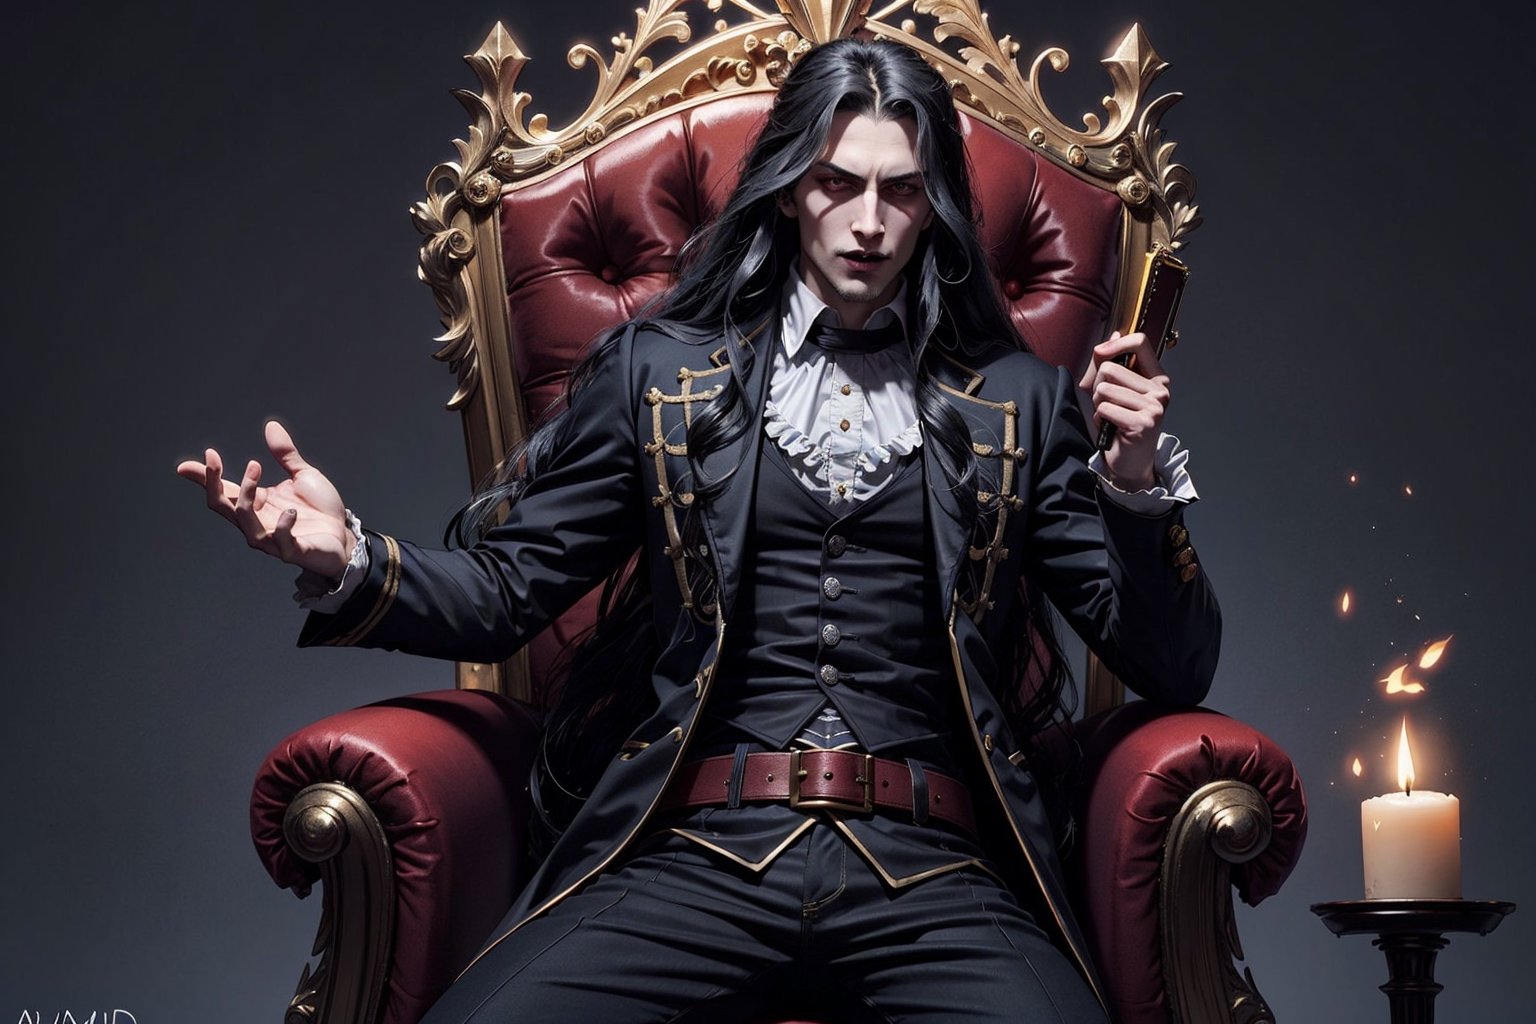 masterpiece,best quality,ultra-detailed,High detailed,picture-perfect face,man,manly,black hair,confident,arrogant,long hair,curly hair,red glowing eyes,fangs,dracula,castlevania,konami,infront of gothic castle,red and black vamiper attire,ornate and intricate,gold trim,belt,epic pose,fantasy,town,1male,draculacastlevania
on his gothic throne,alucardcastlevania,DonMDj1nnM4g1cXL 